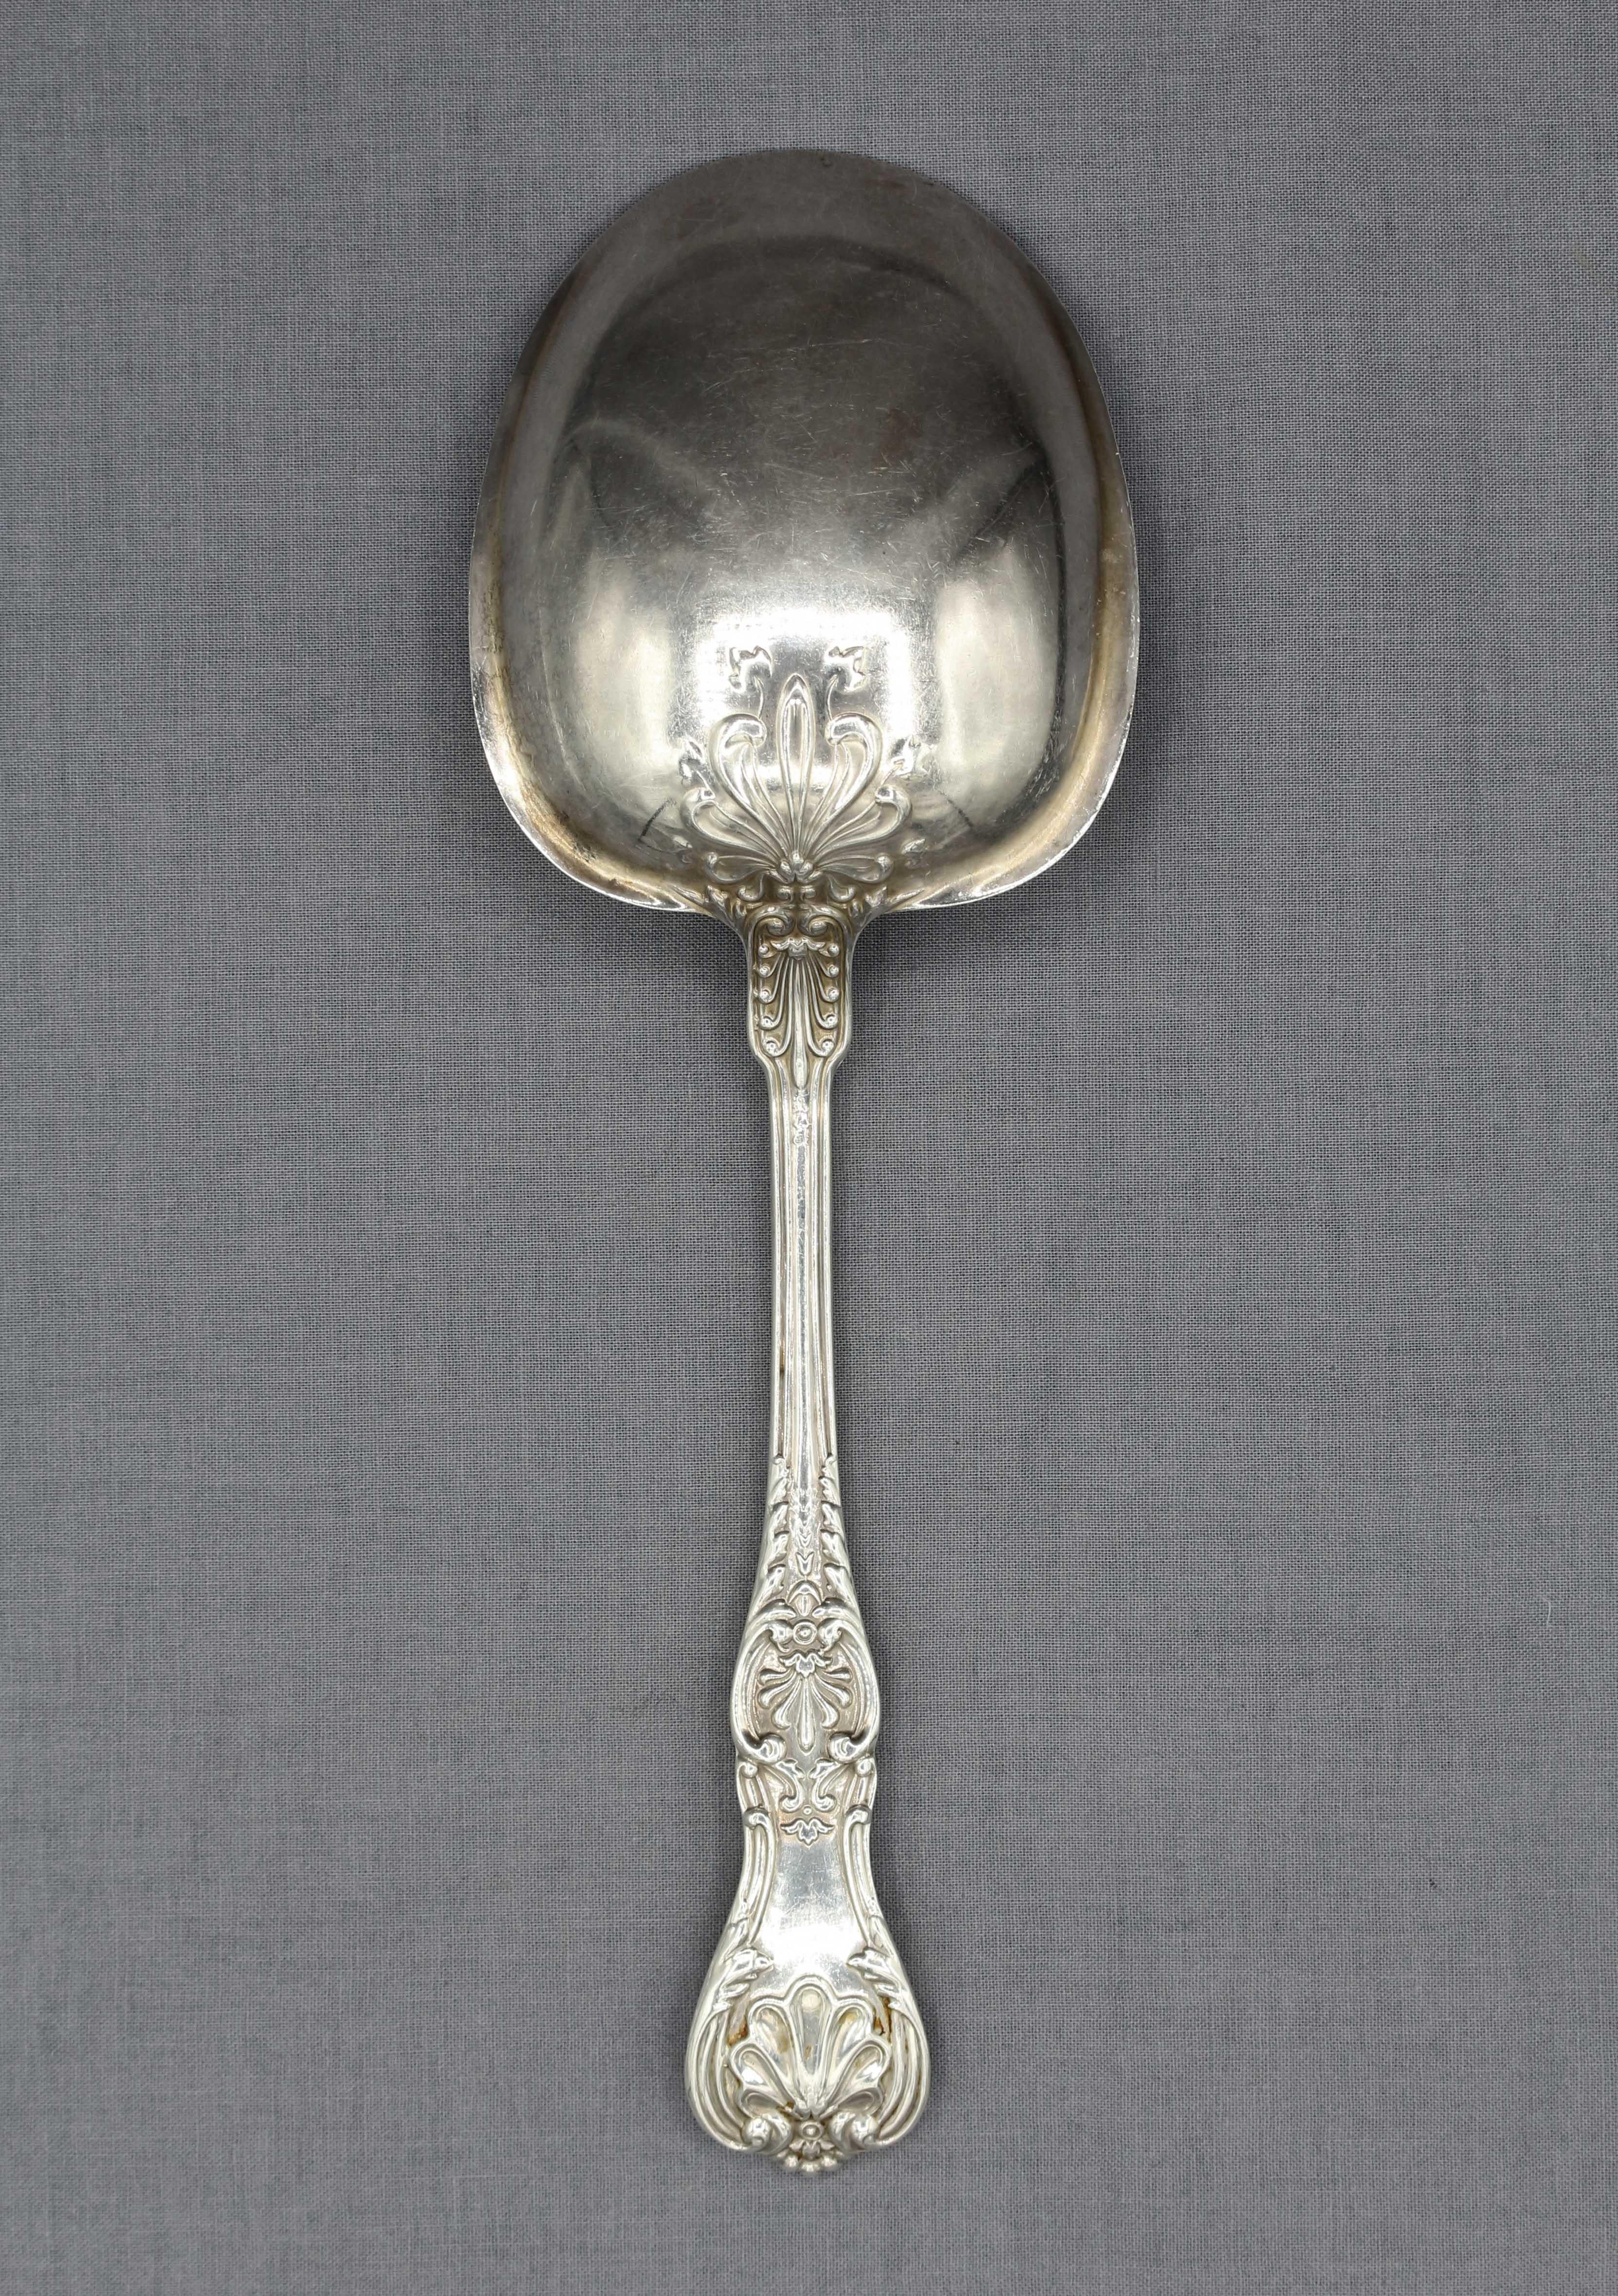 Sterling silver King George pattern berry spoon by Gorham, early 20th century. Monogram EC. 1894 pattern. 4.40 troy oz.
9 1/8